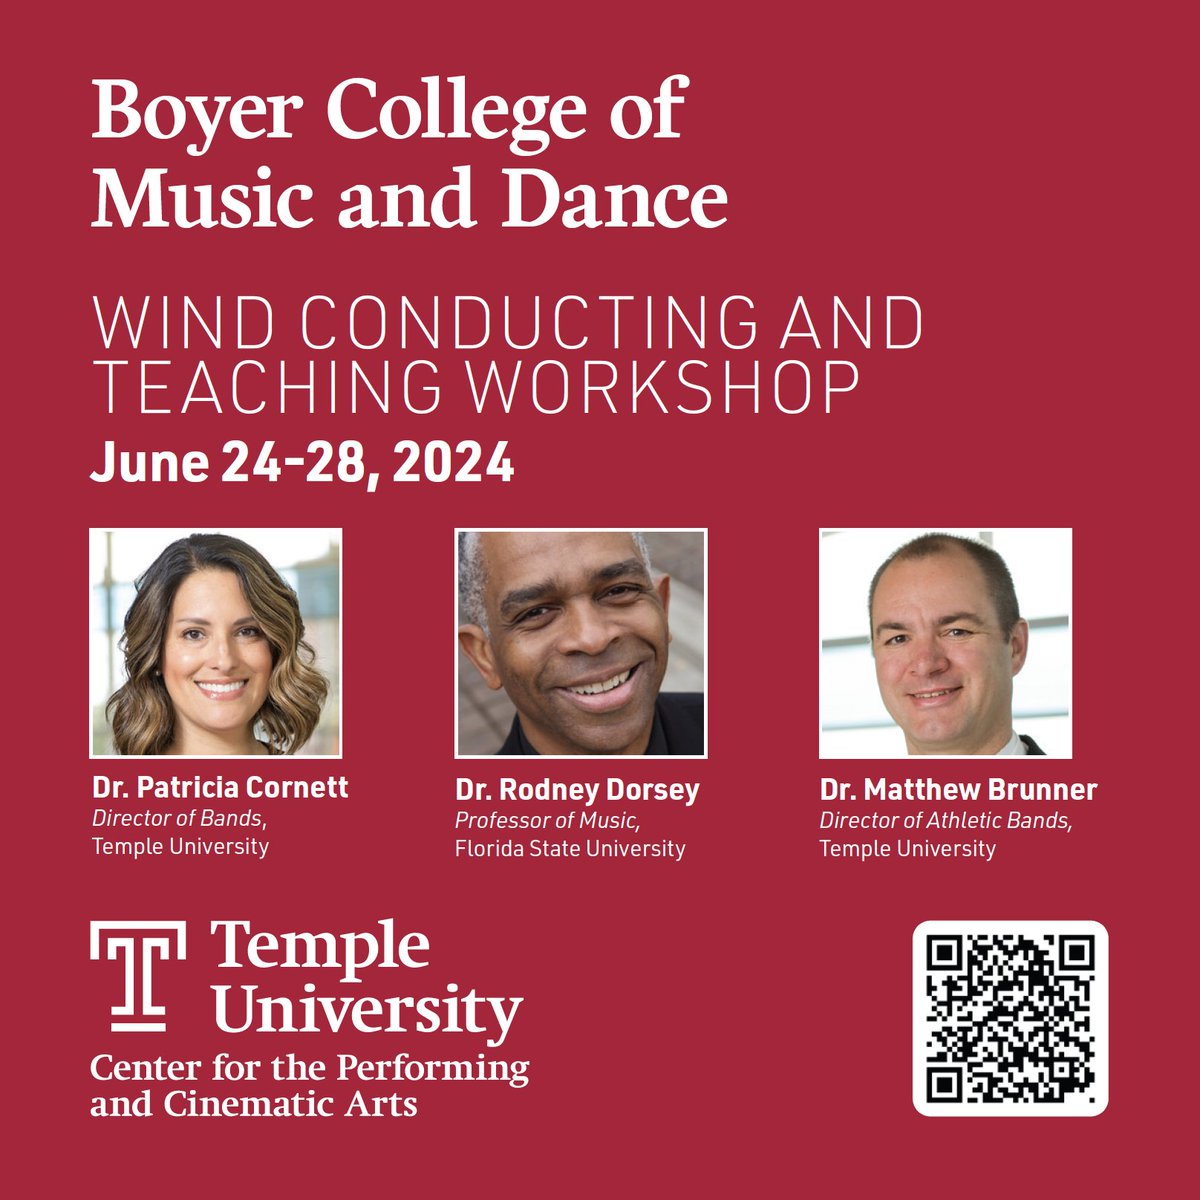 Our Wind Conducting and Teaching Workshop returns this summer! Conductors and educators of all levels are welcome. Learn more and register now at boyer.temple.edu/conductingwork….